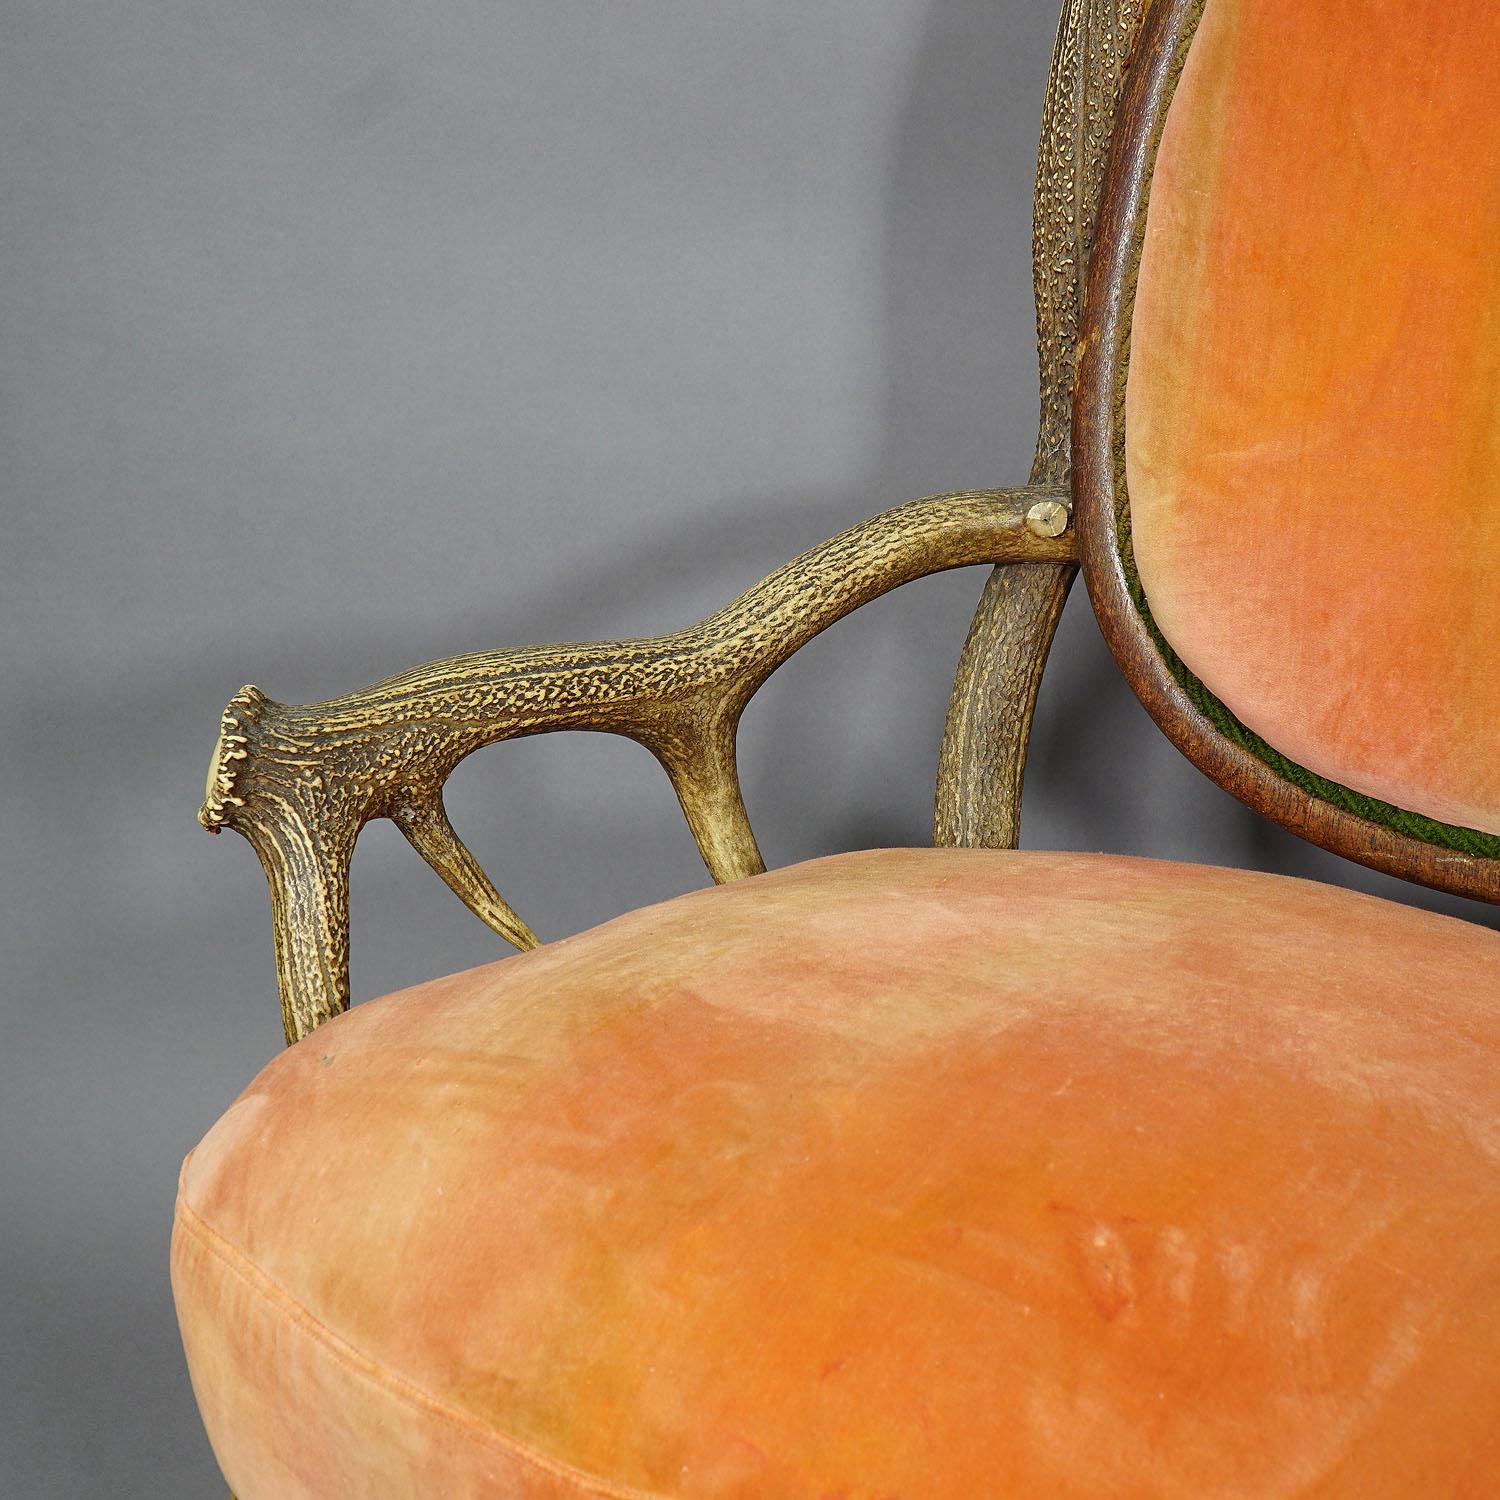 A rare antler armchair made of great original horns from the stag. elaborate manufactured in Austria - most probably by Hermann Keitel, circa 1890. Upholstered with red velvet fabric (probably renewed).

Please contact us for an individual shipping